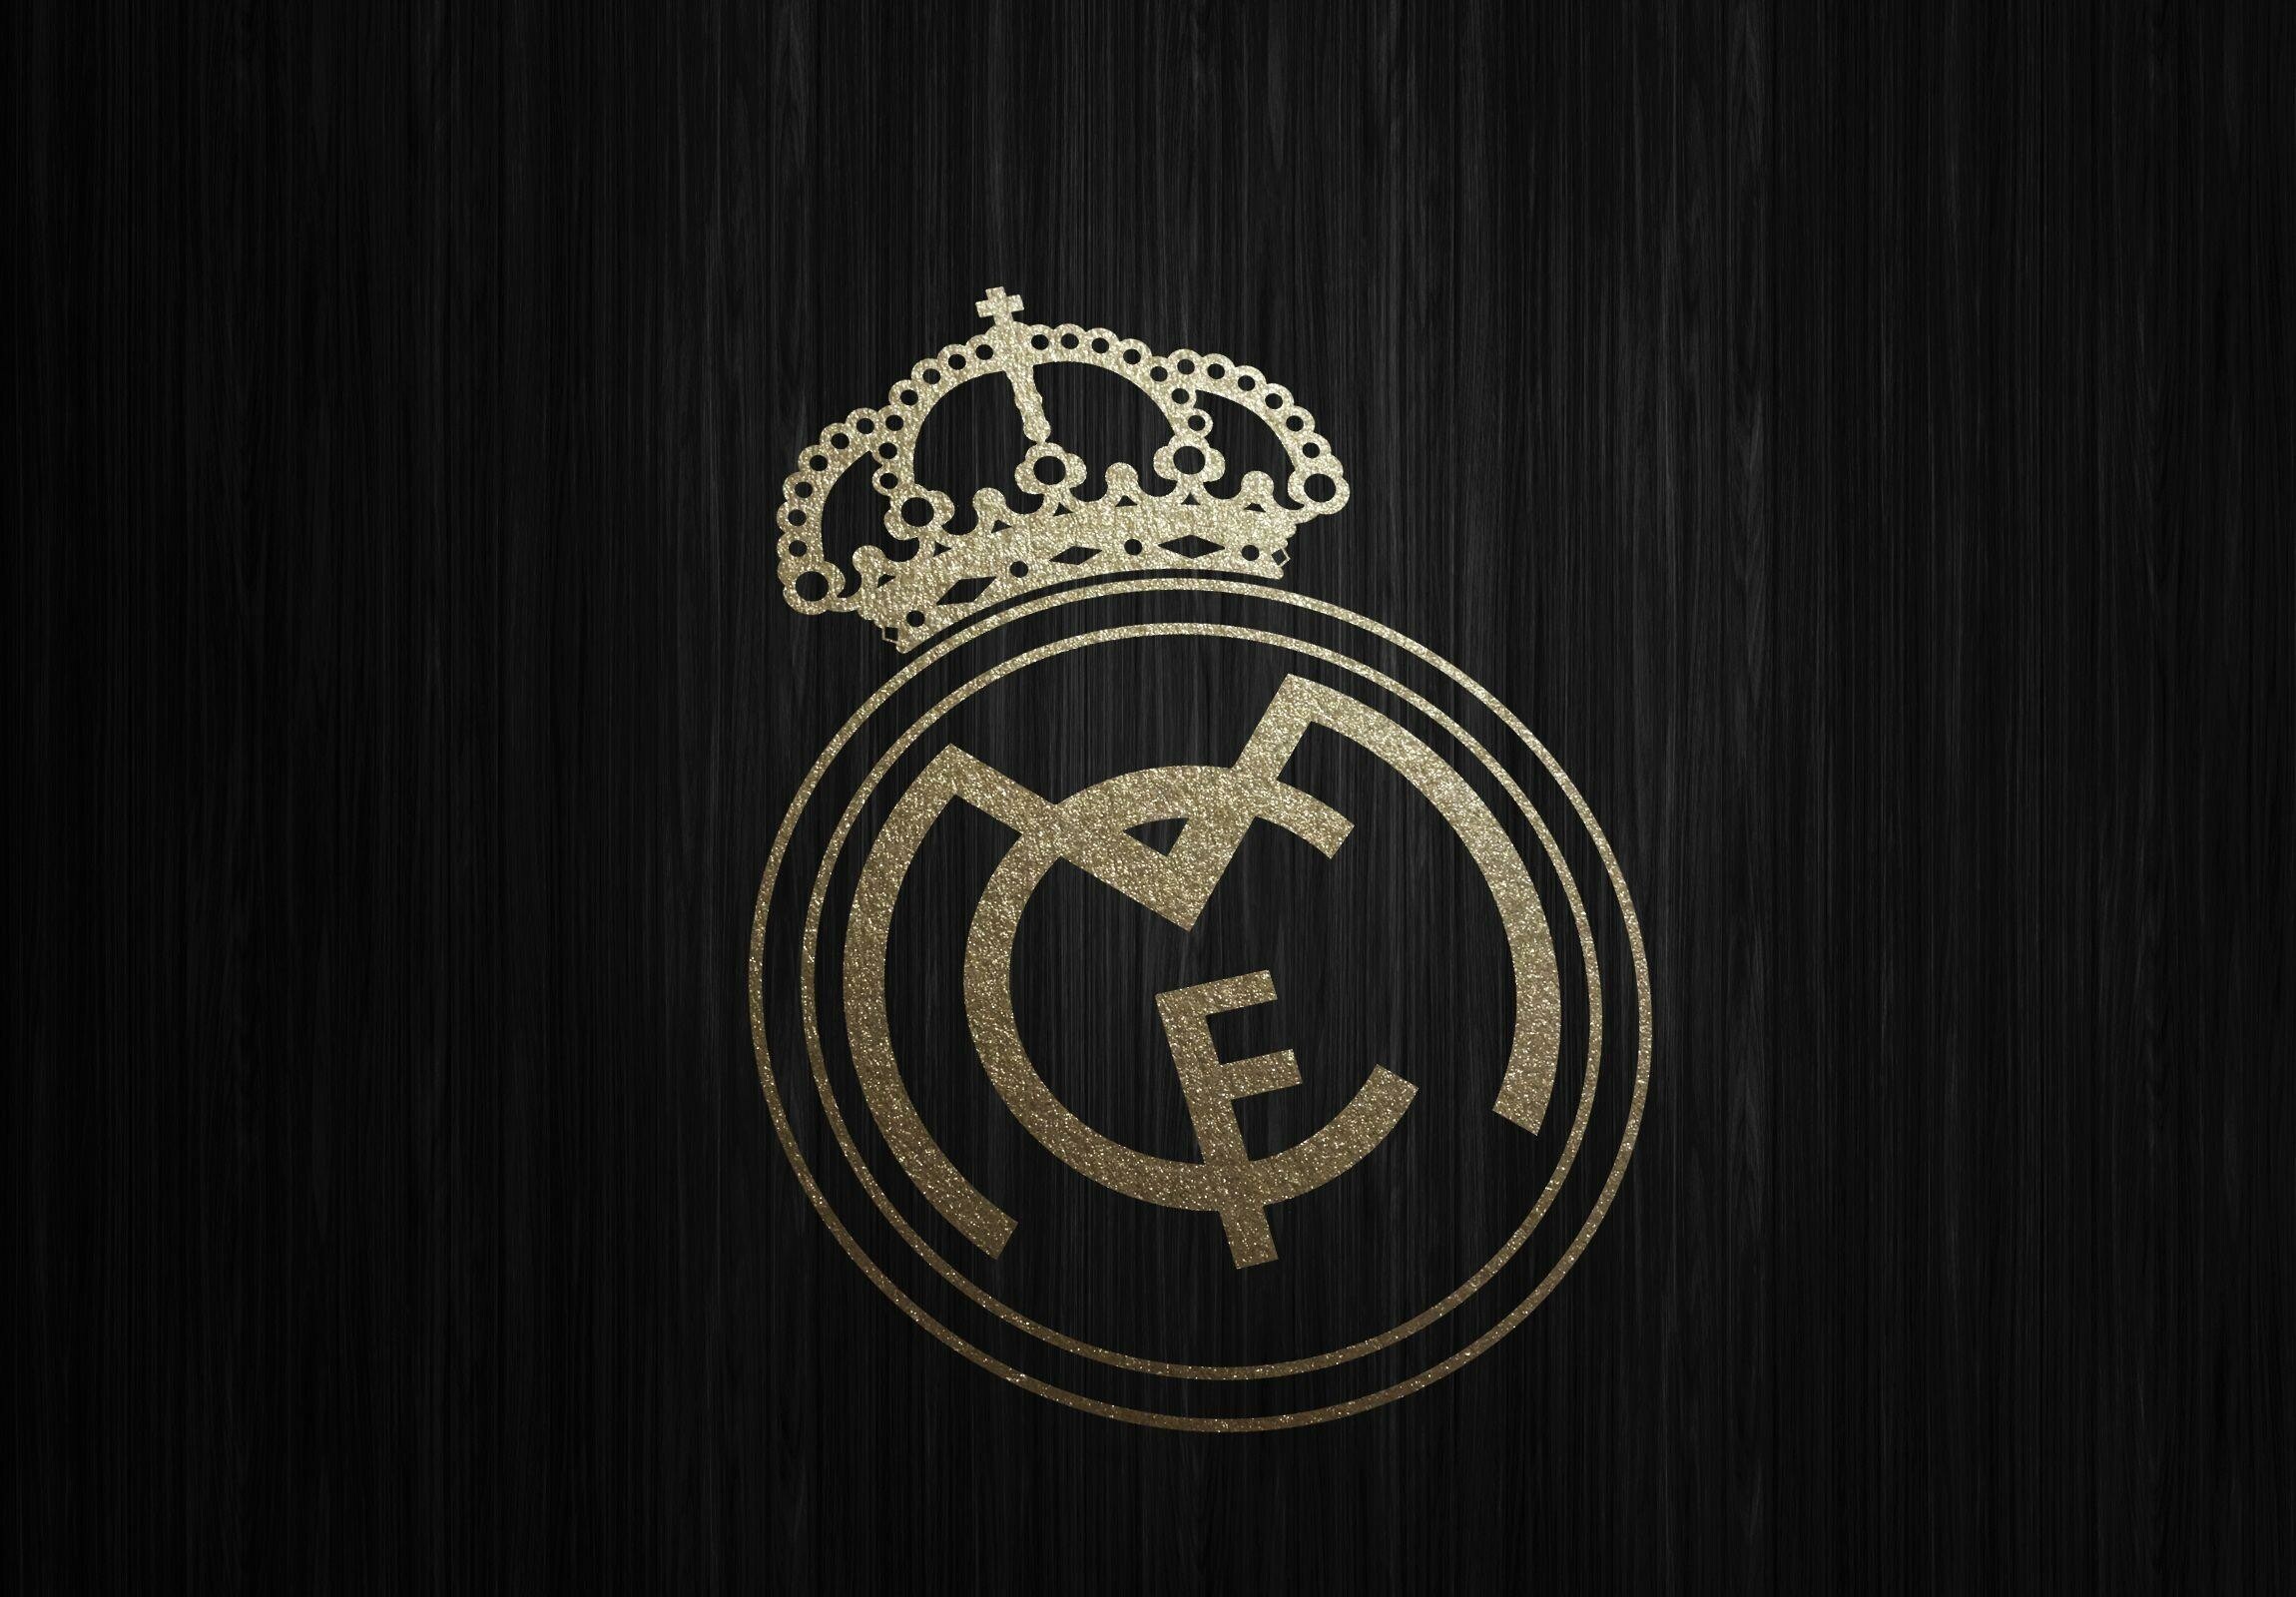 Real Madrid Wallpaper: HD, 4K, 5K for PC and Mobile. Download free image for iPhone, Android